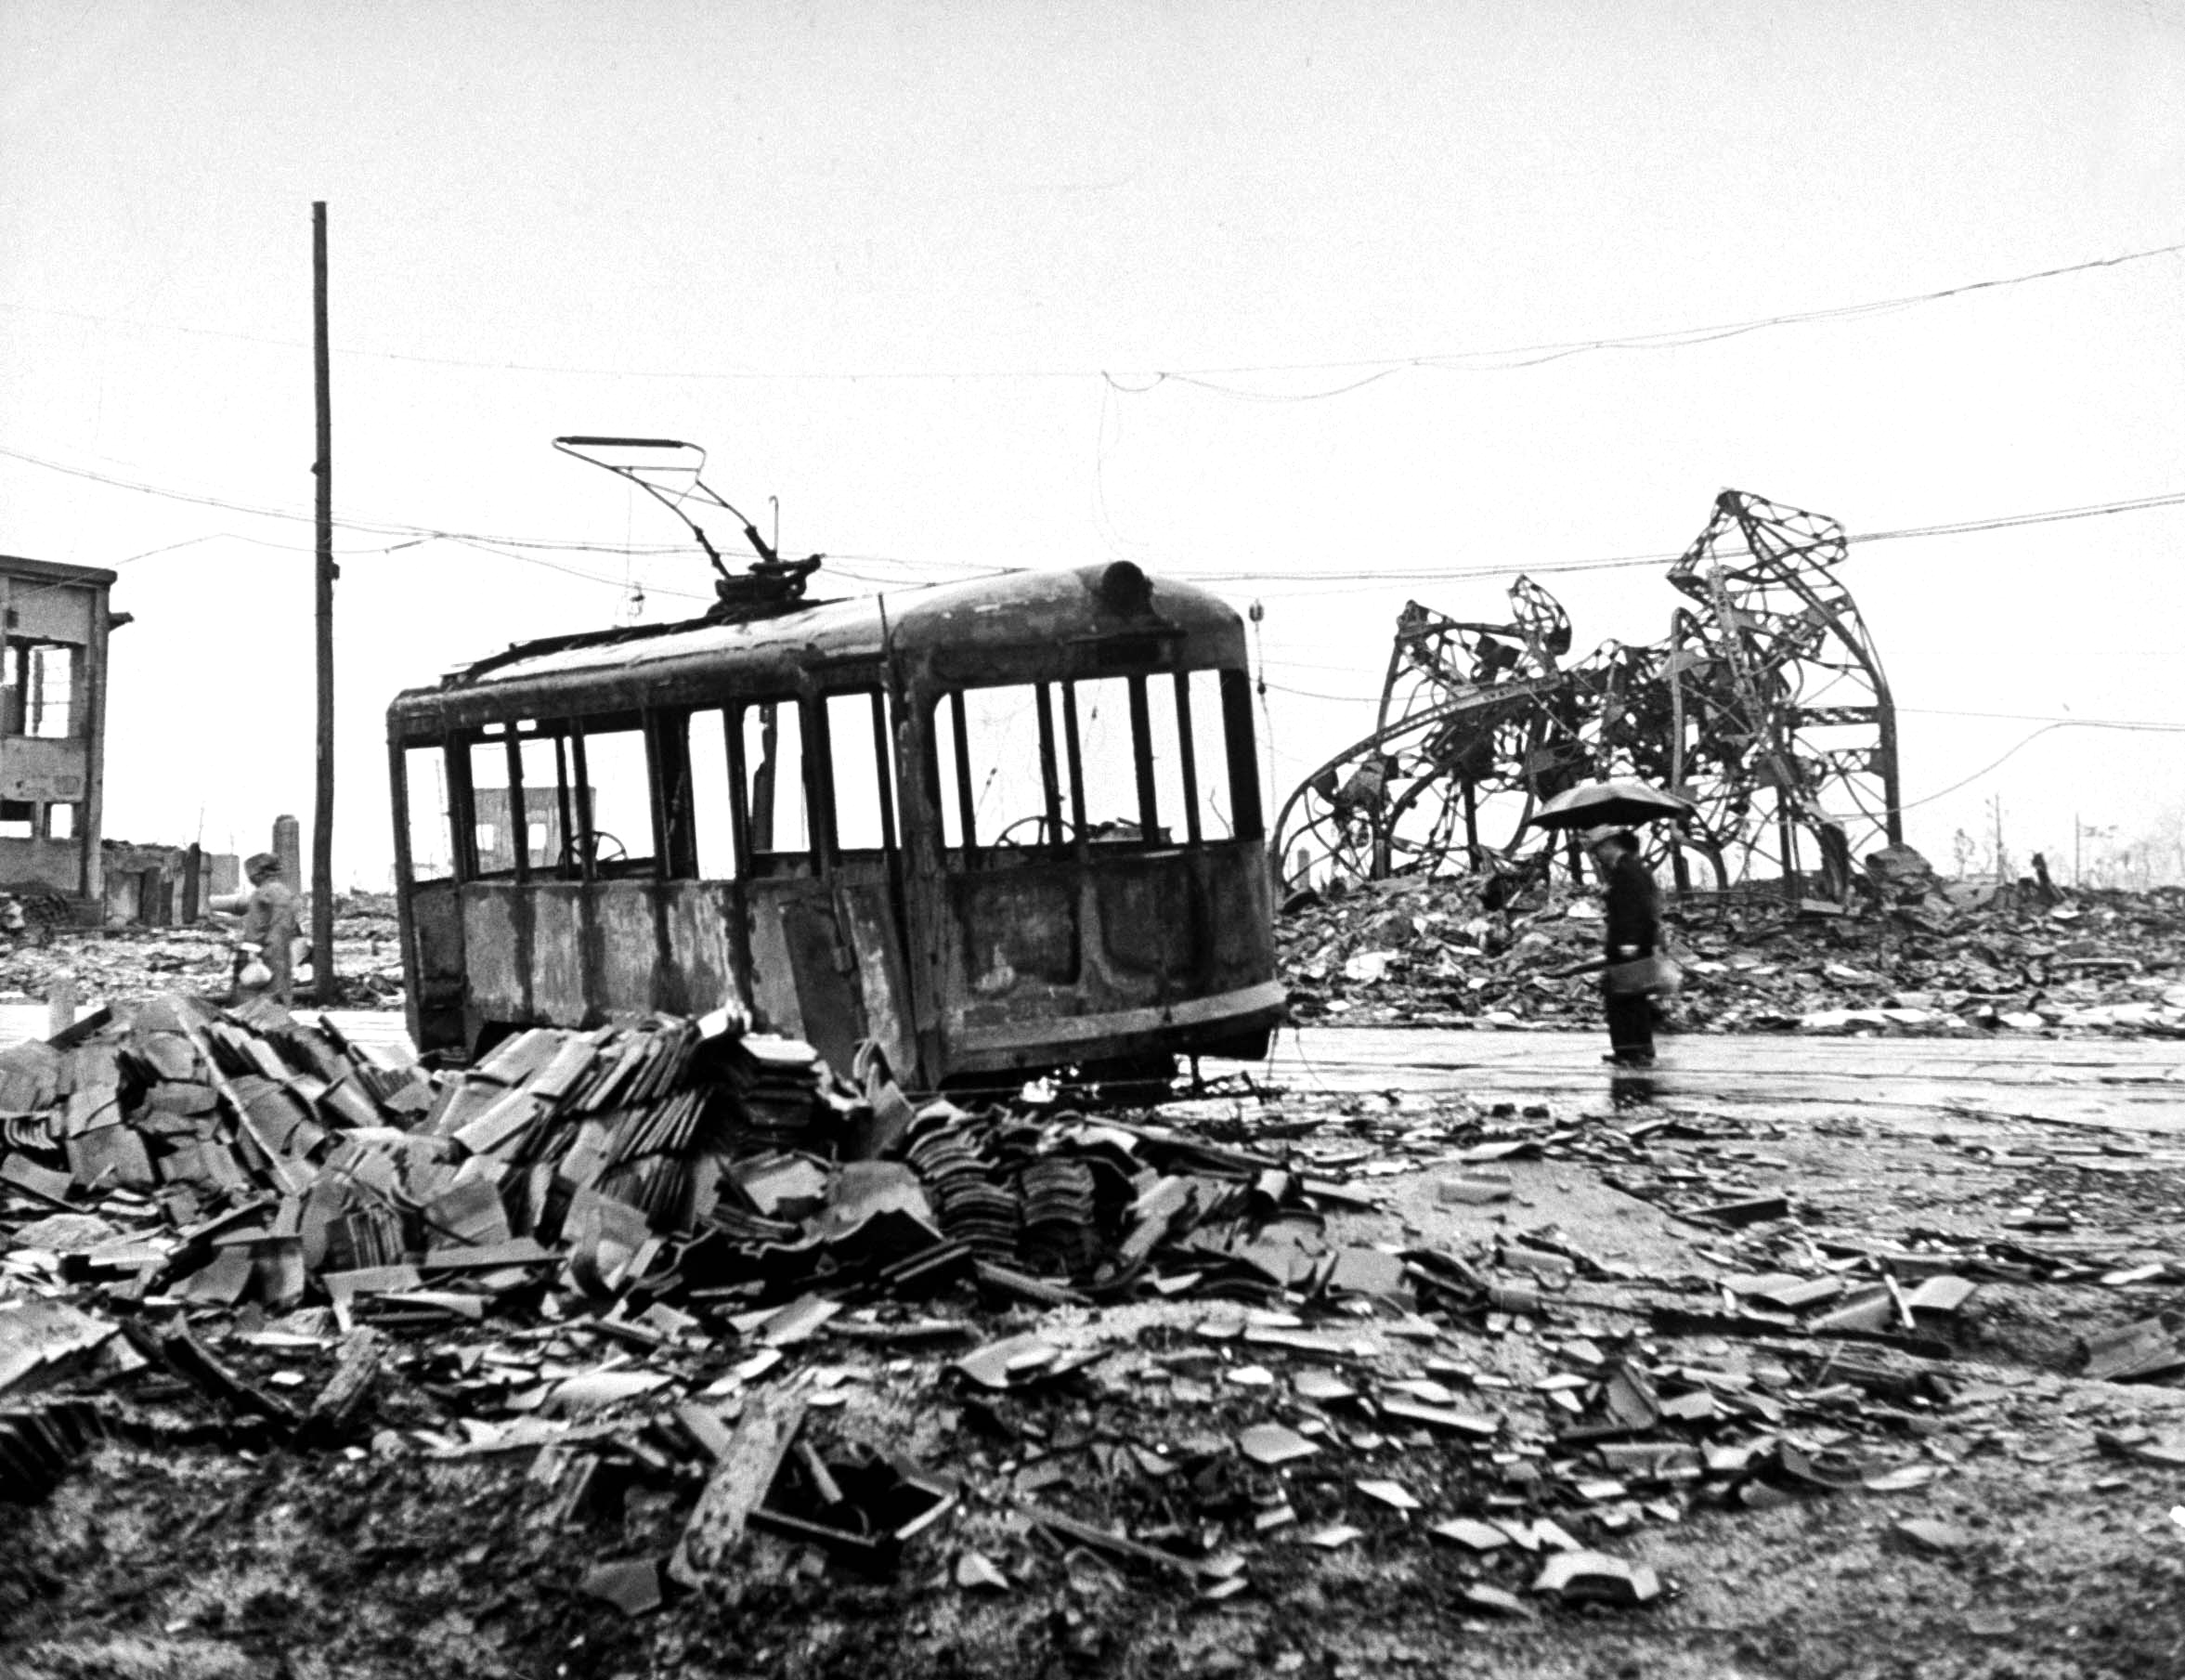 A gutted trolley car amid Hiroshima ruins, months after America's August 1945 atomic bomb attack on the city.